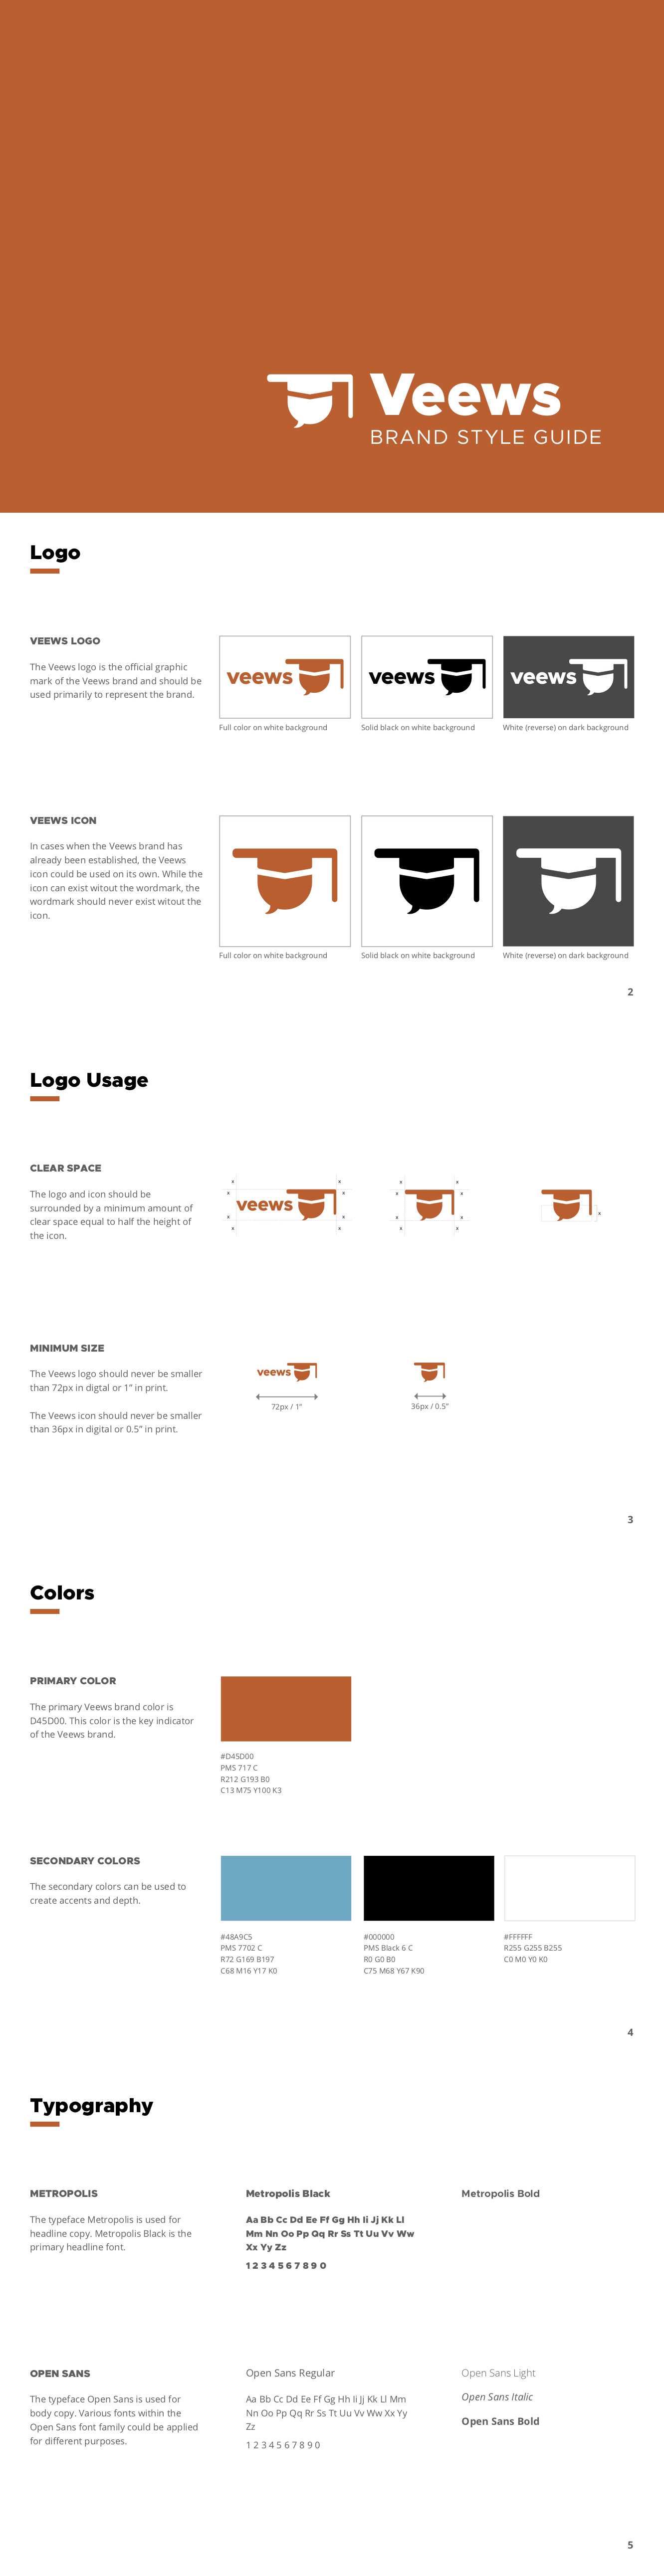 Veews Brand Style Guide